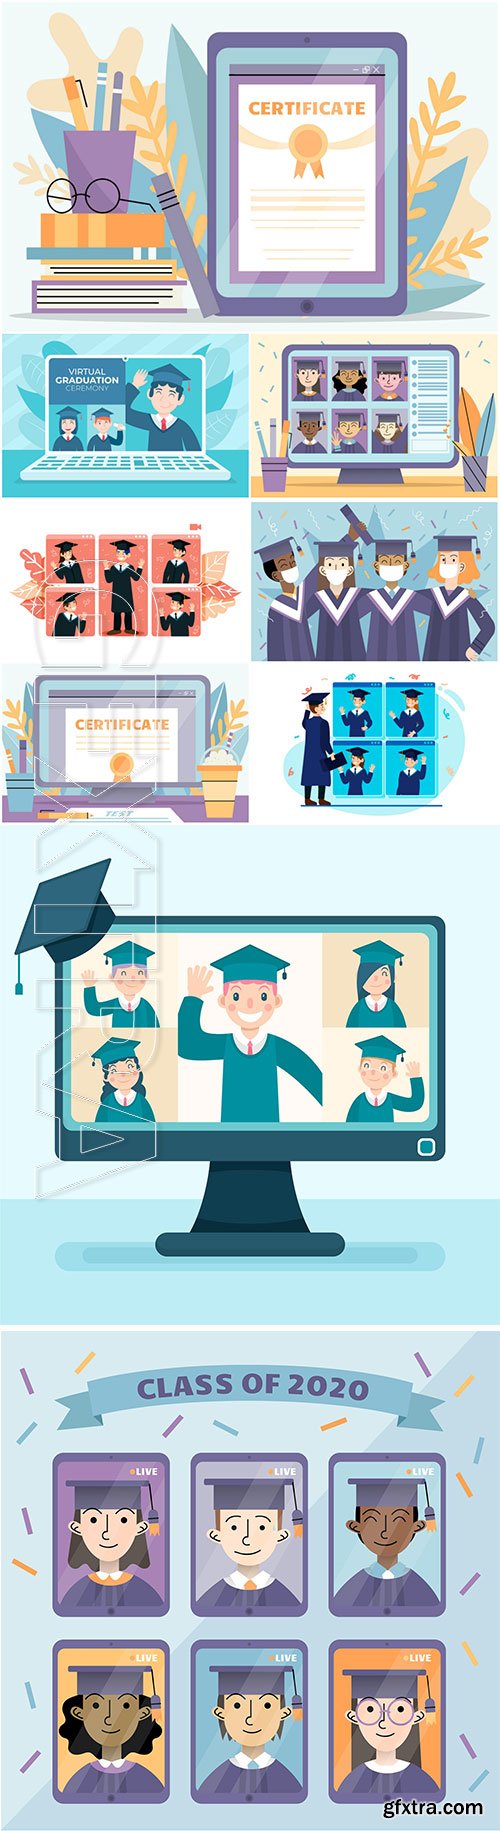 Virtual graduation ceremony with students and computer